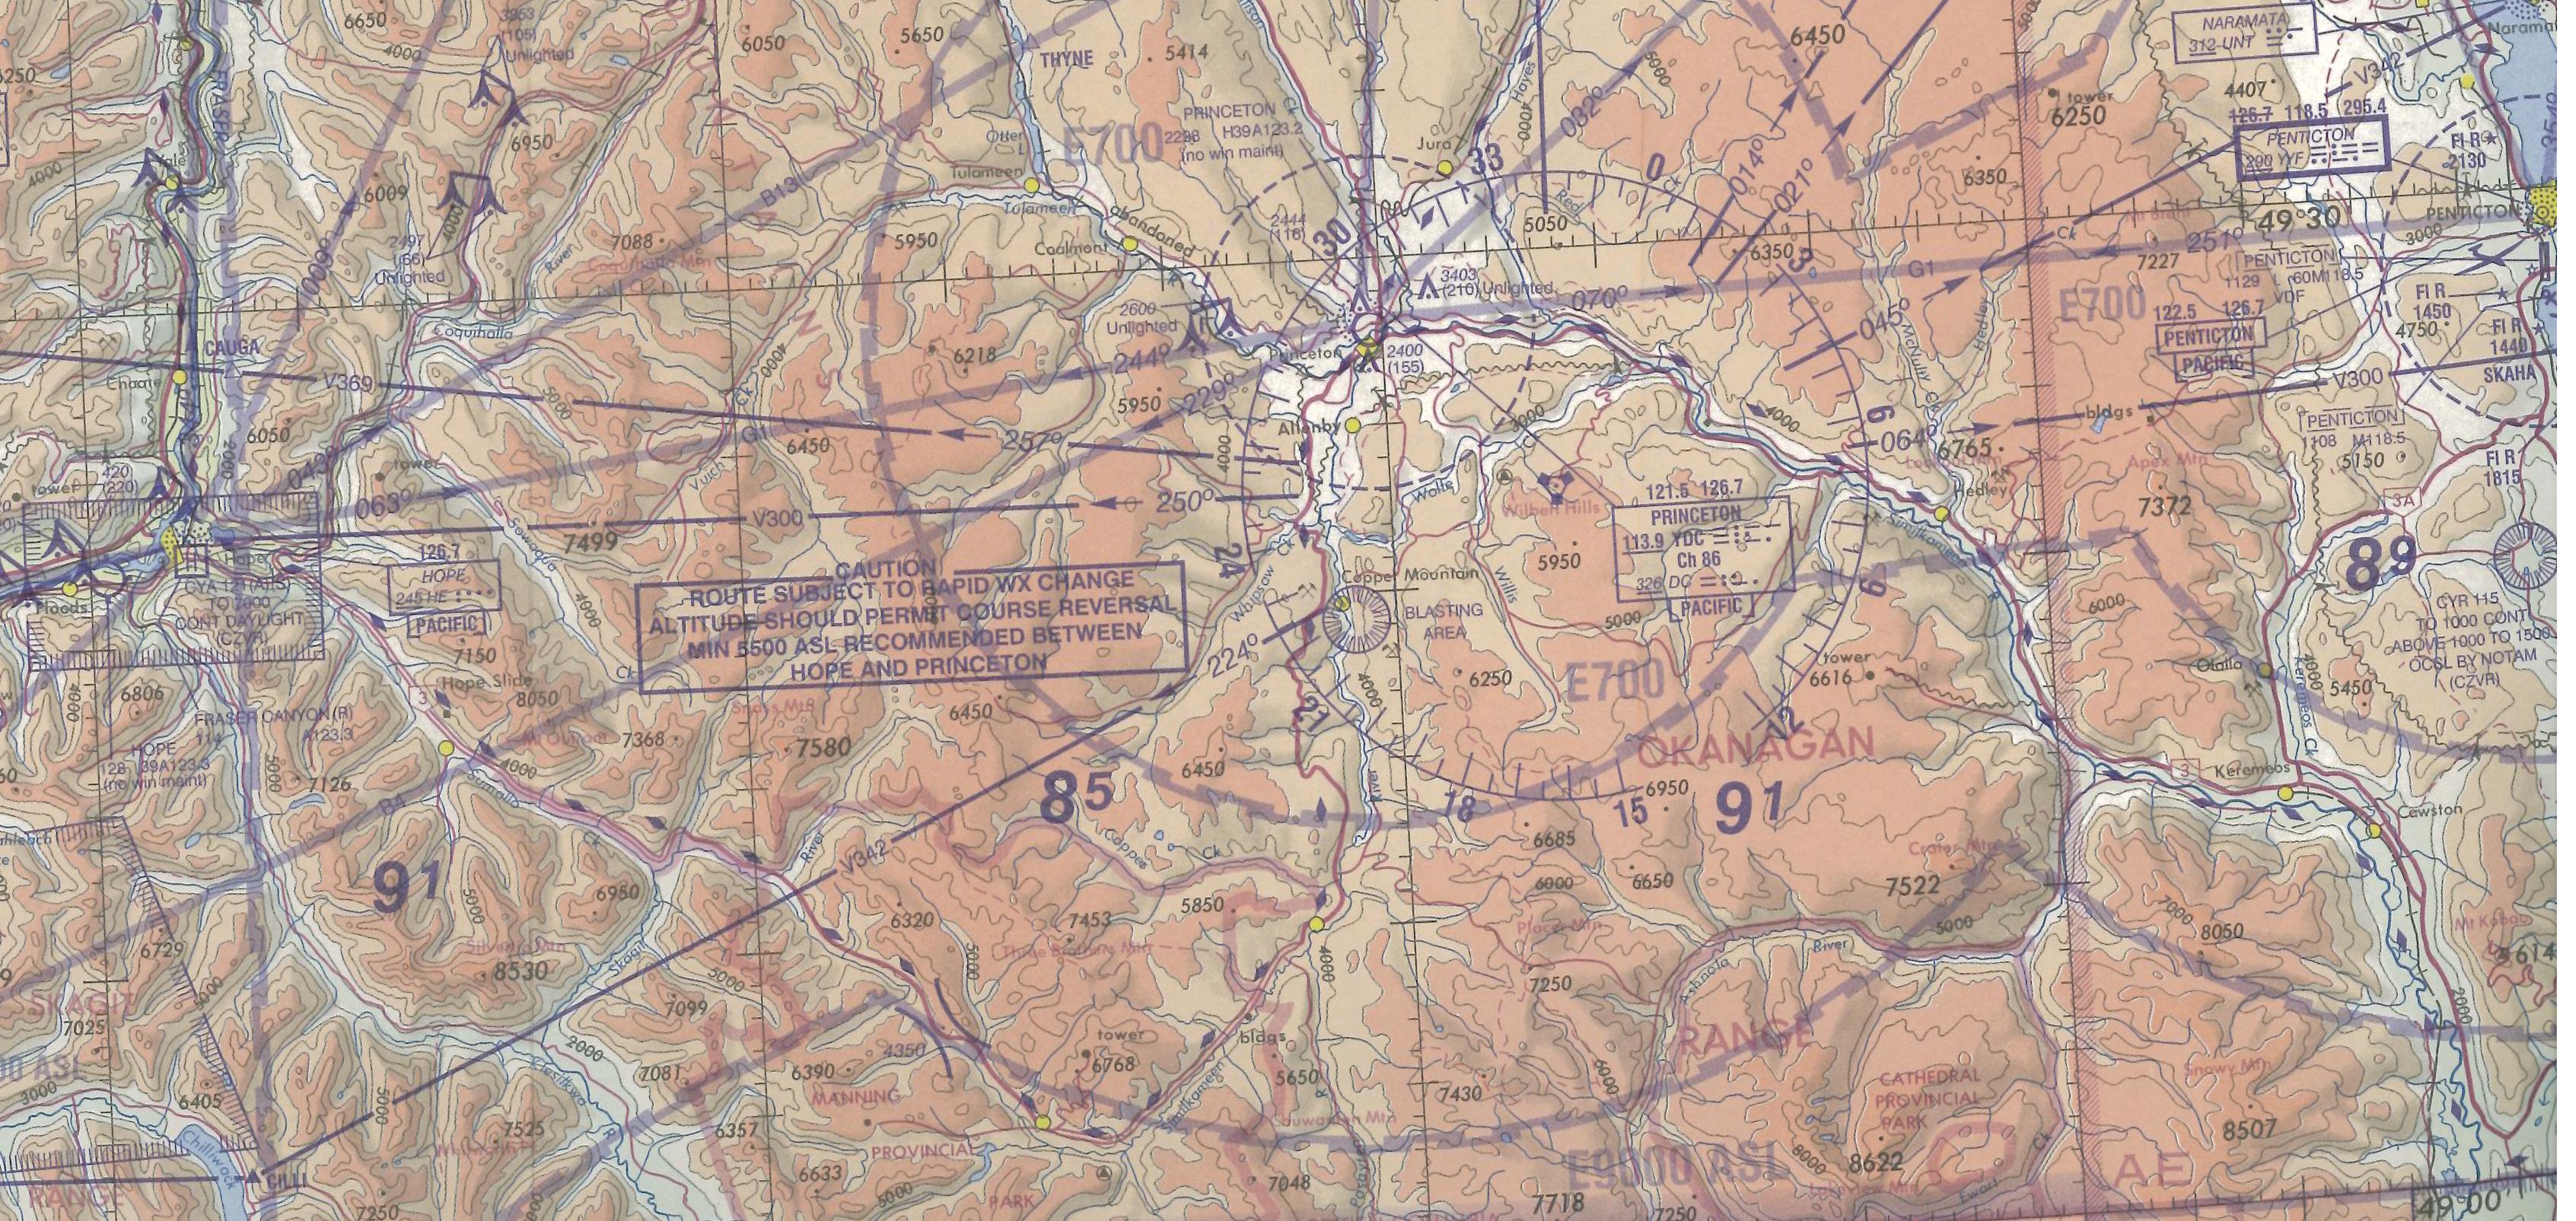 Map Room, Hope--Princeton Rout (Hwy #3), Langley Flying School